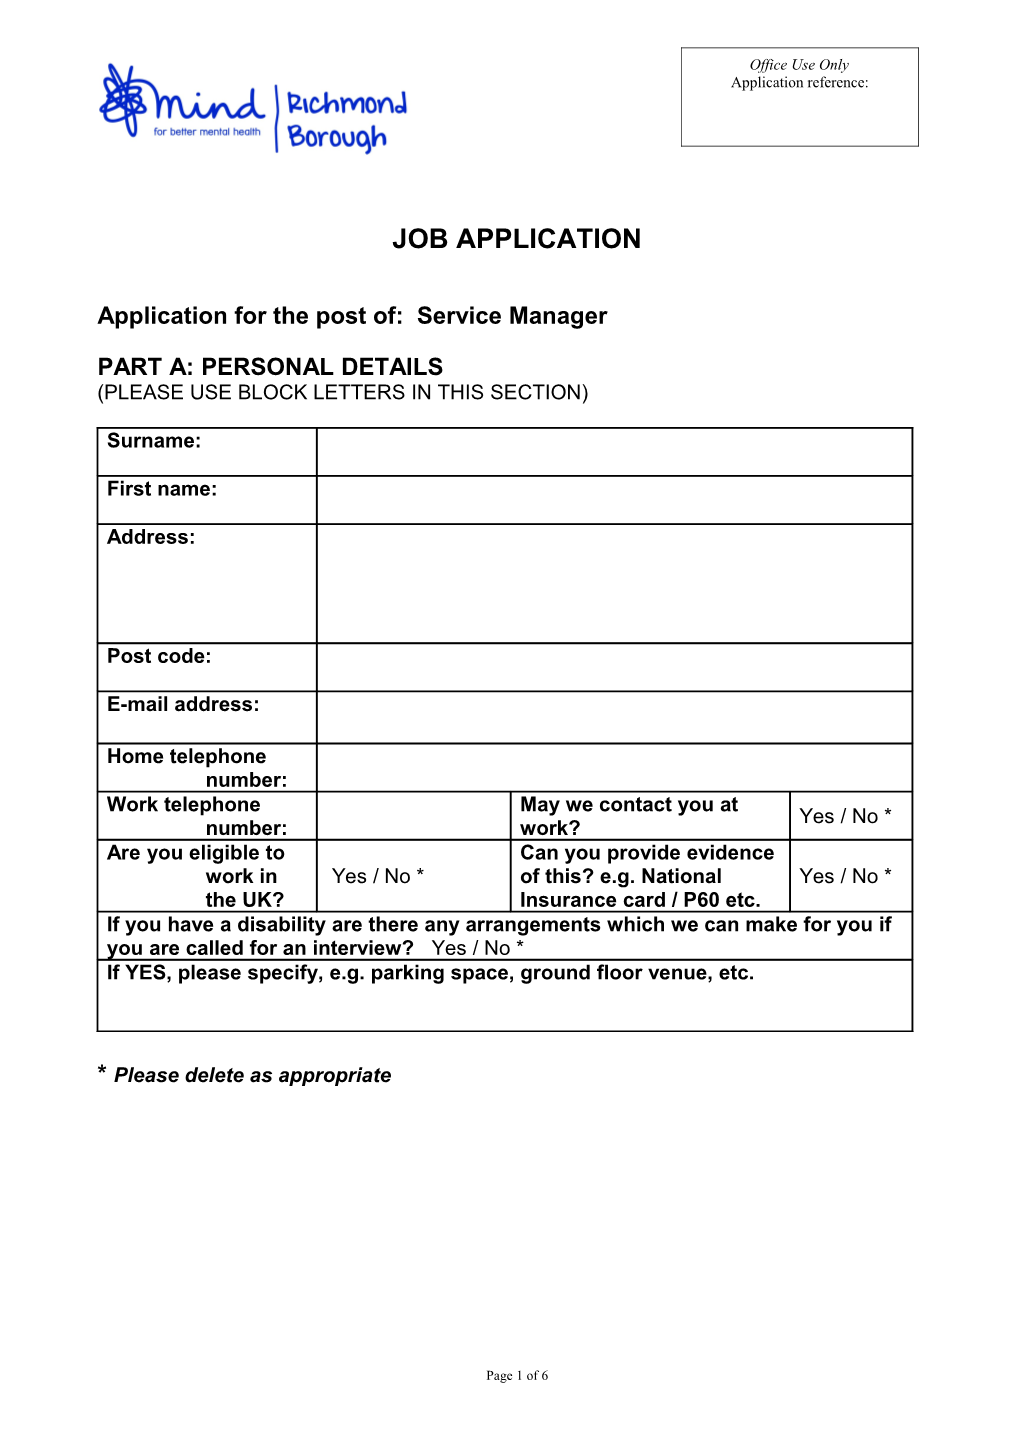 Application for the Post Of: Service Manager